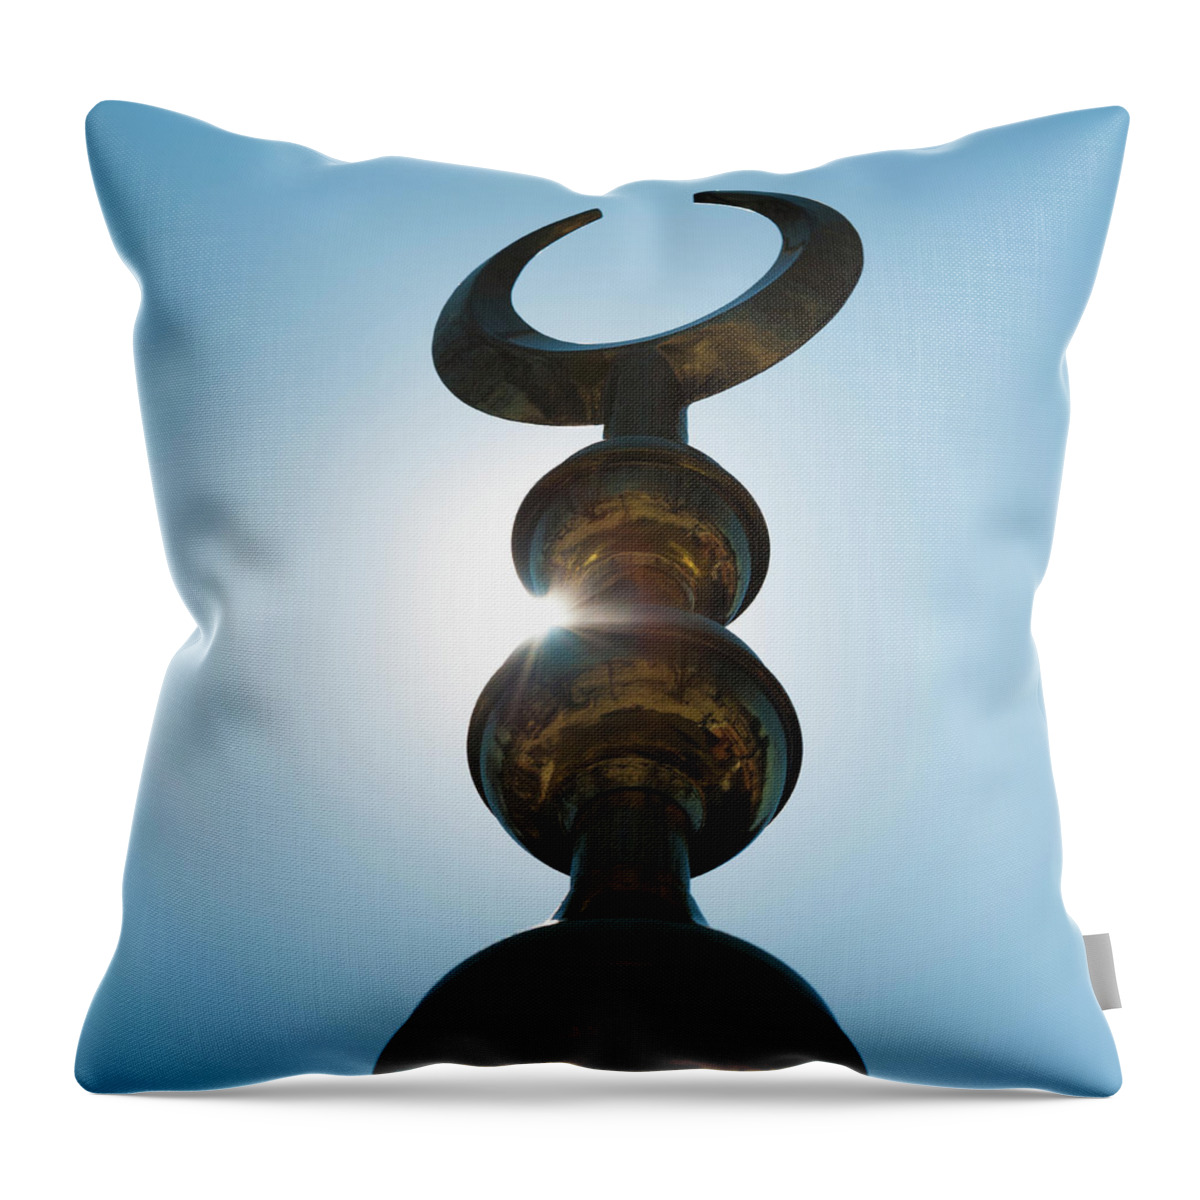 Istanbul Throw Pillow featuring the photograph Sunburst Behind The Spire On Top Of by Keith Levit / Design Pics